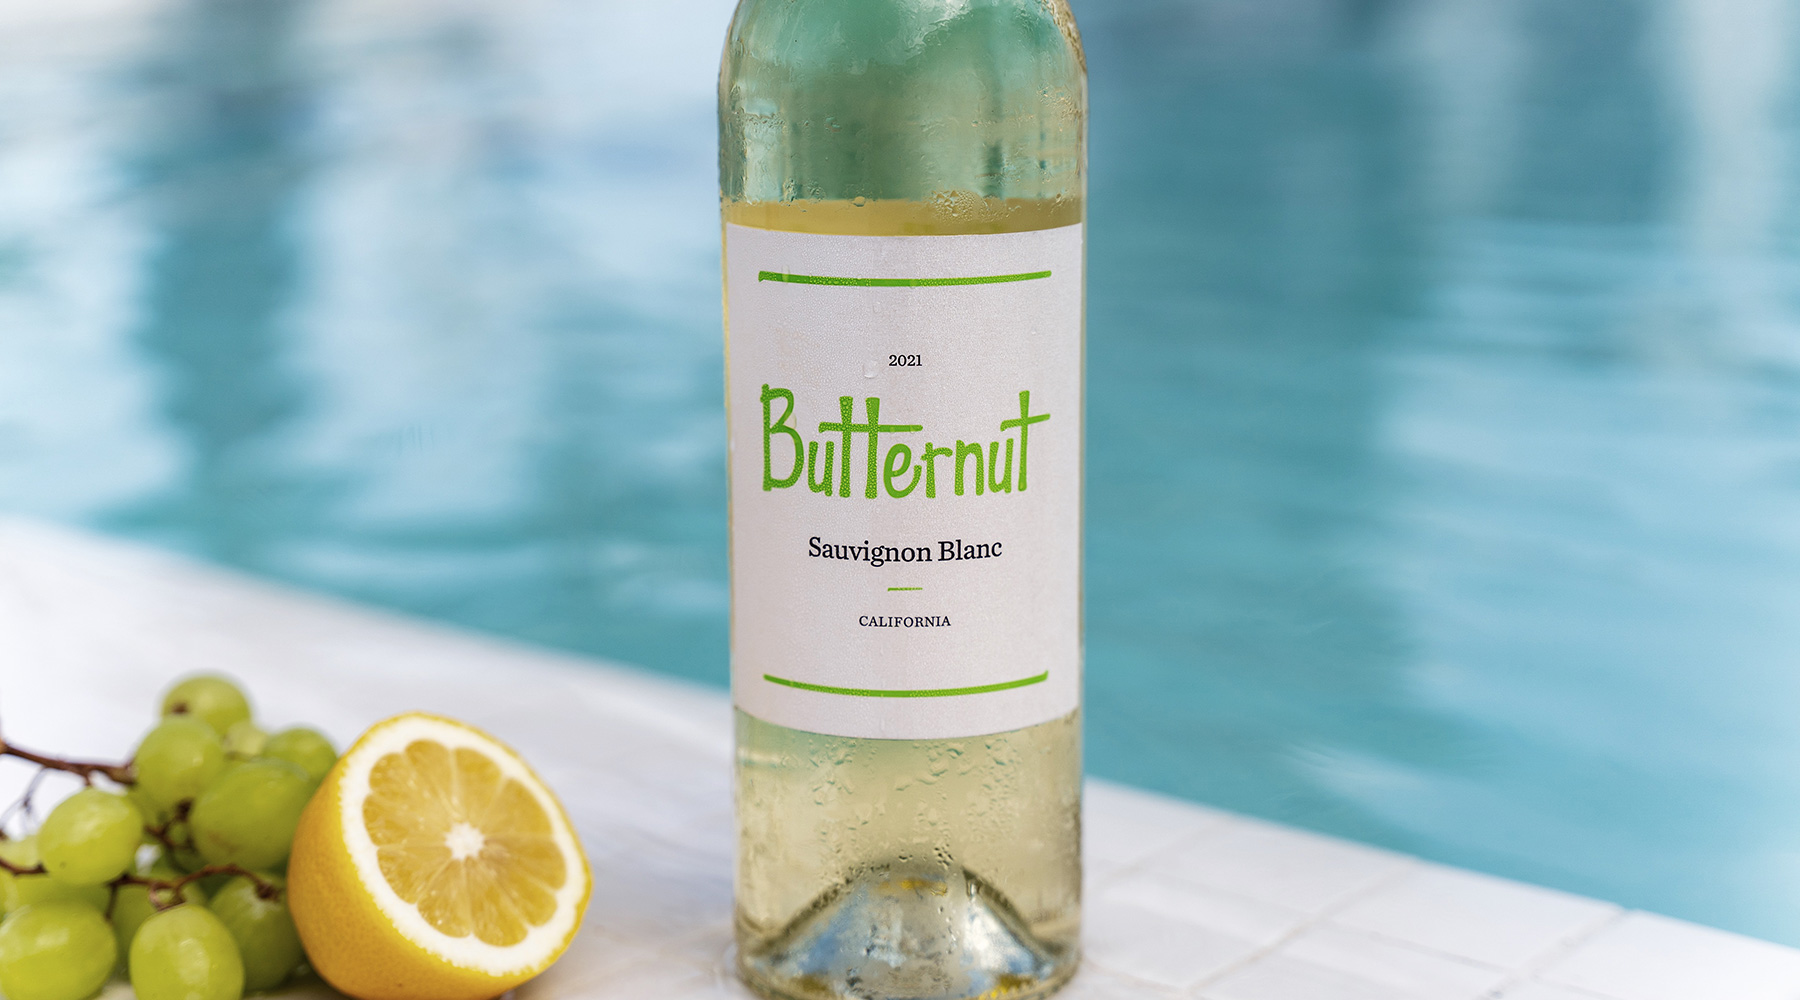 5 Butternut Pairings to Whip Up for Summer Pool Days